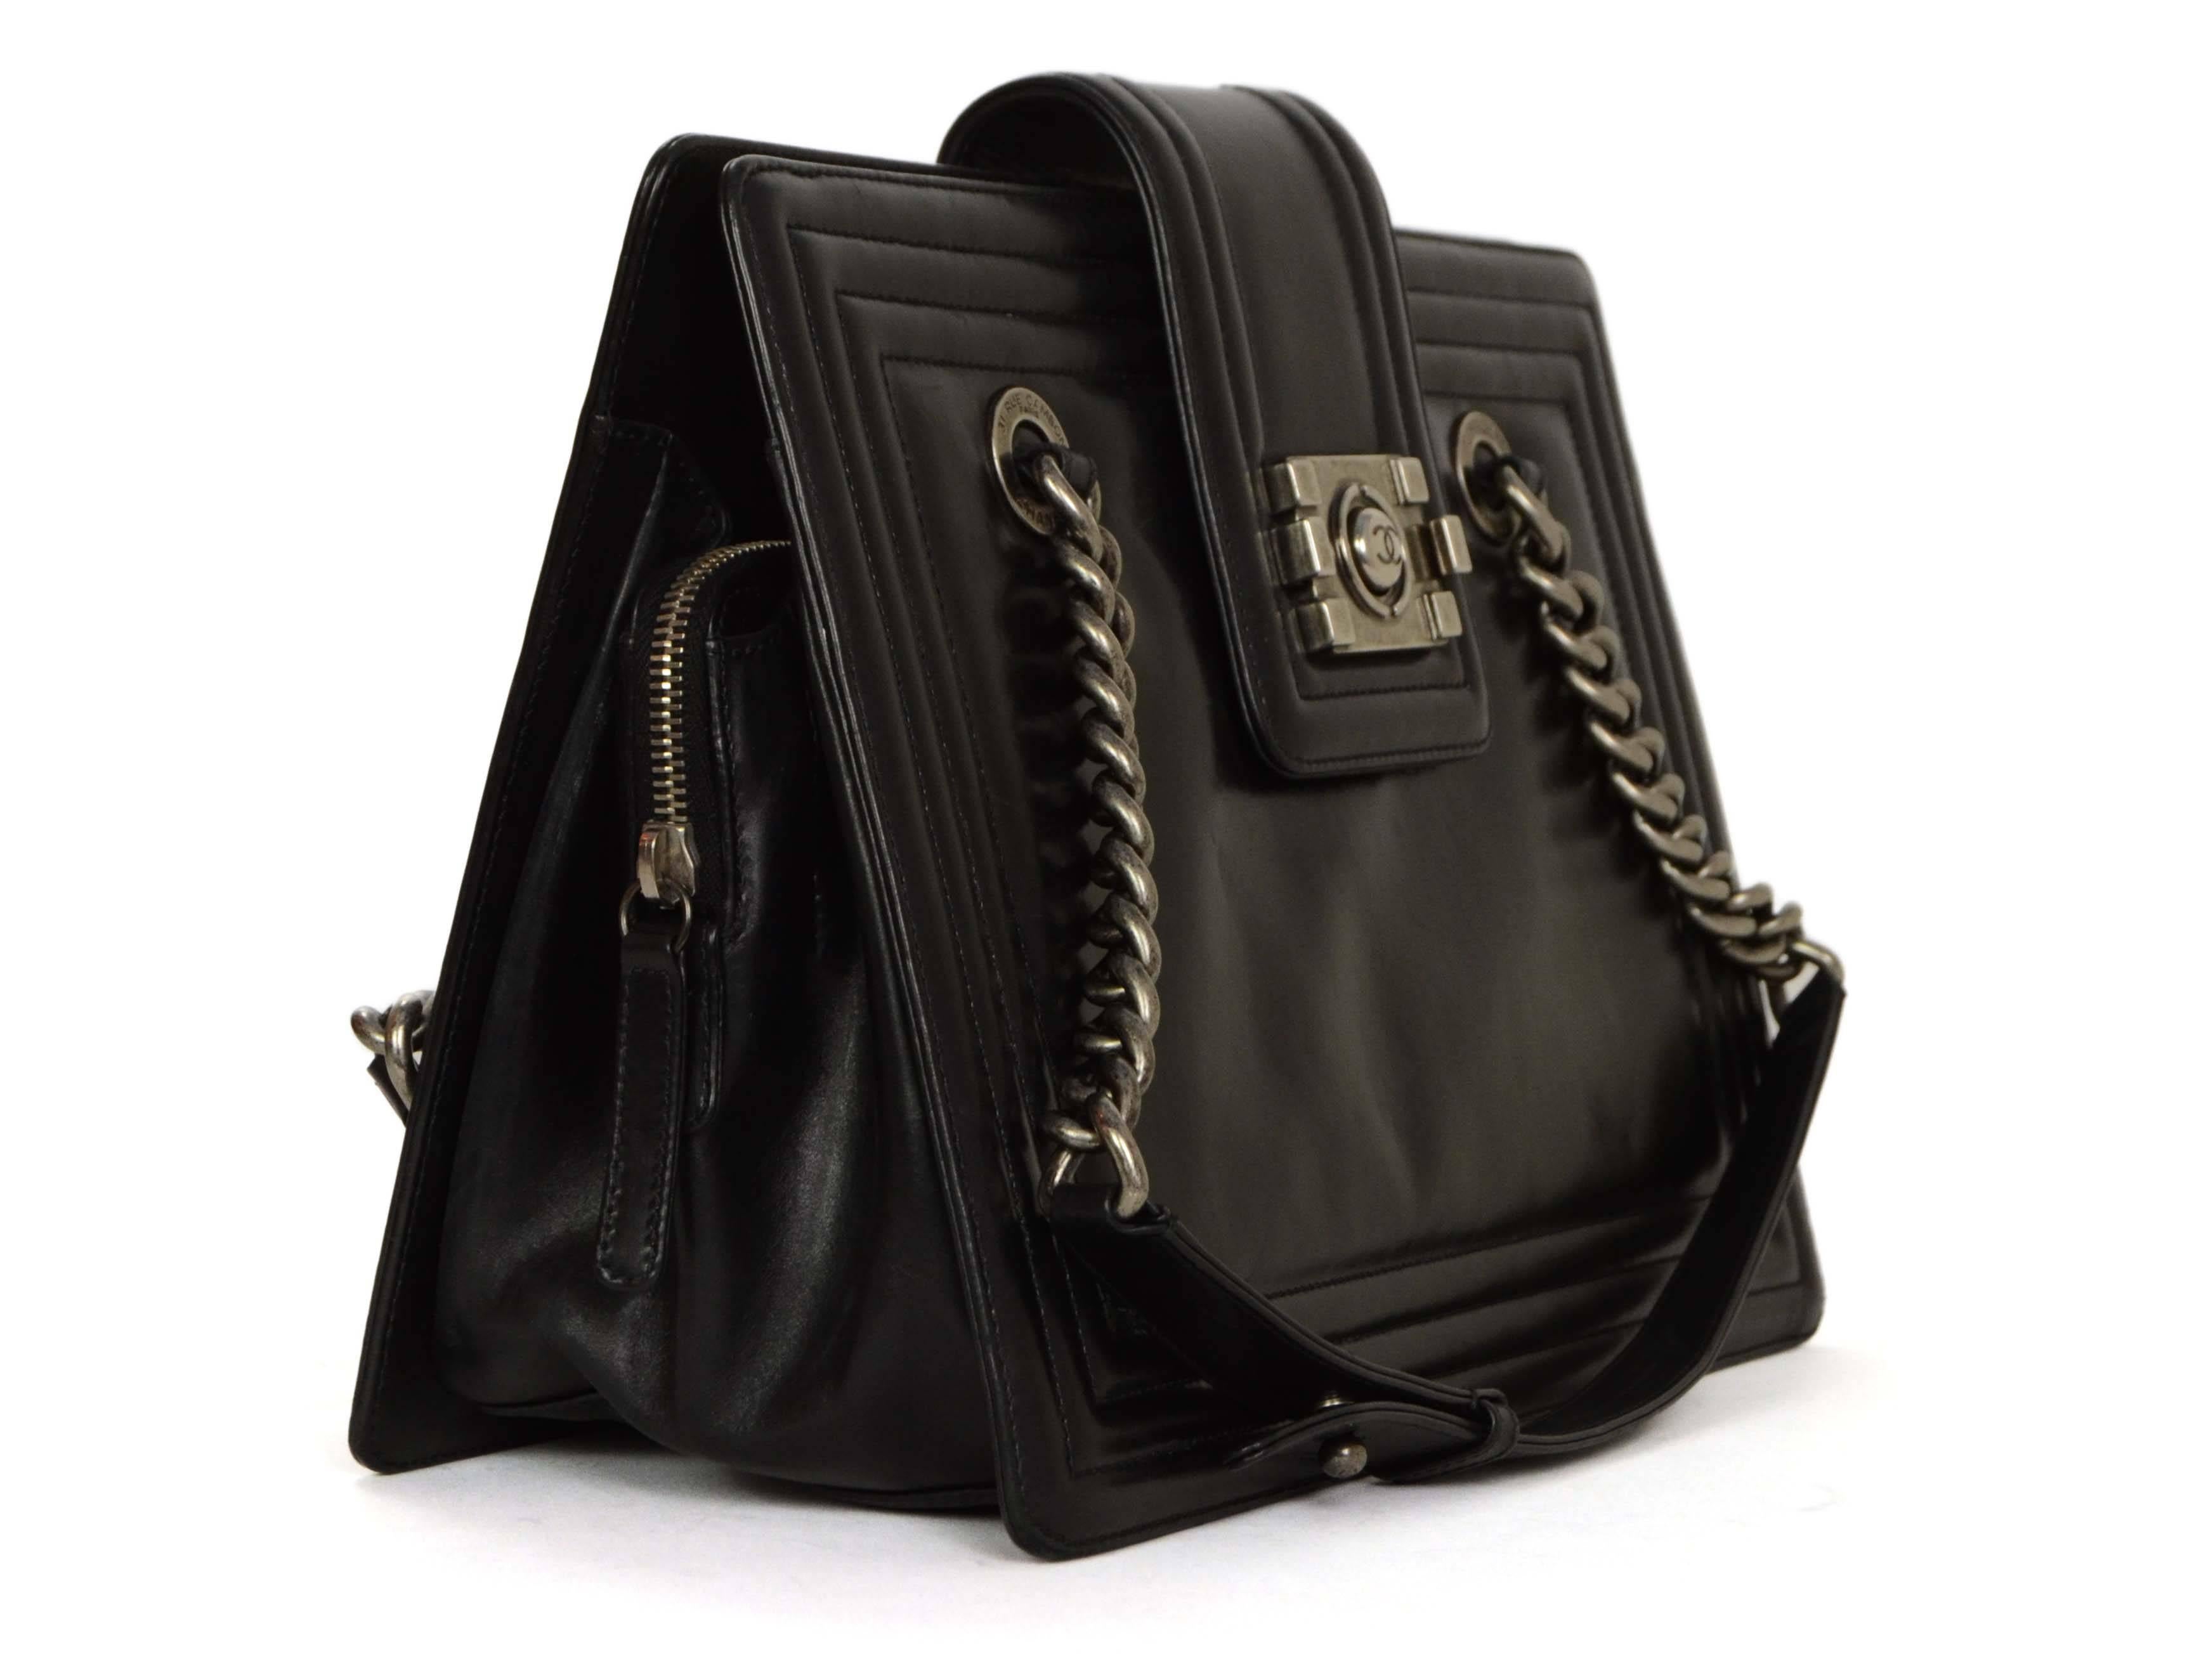 Chanel Black Polished Calfskin Boy Tote Bag

    Made In: Italy

    Year of Production: 2011

    Color: Black

    Hardware: Ruthenium

    Materials: Calfskin leather, metal

    Lining: Black fabric lining

    Closure/Opening: